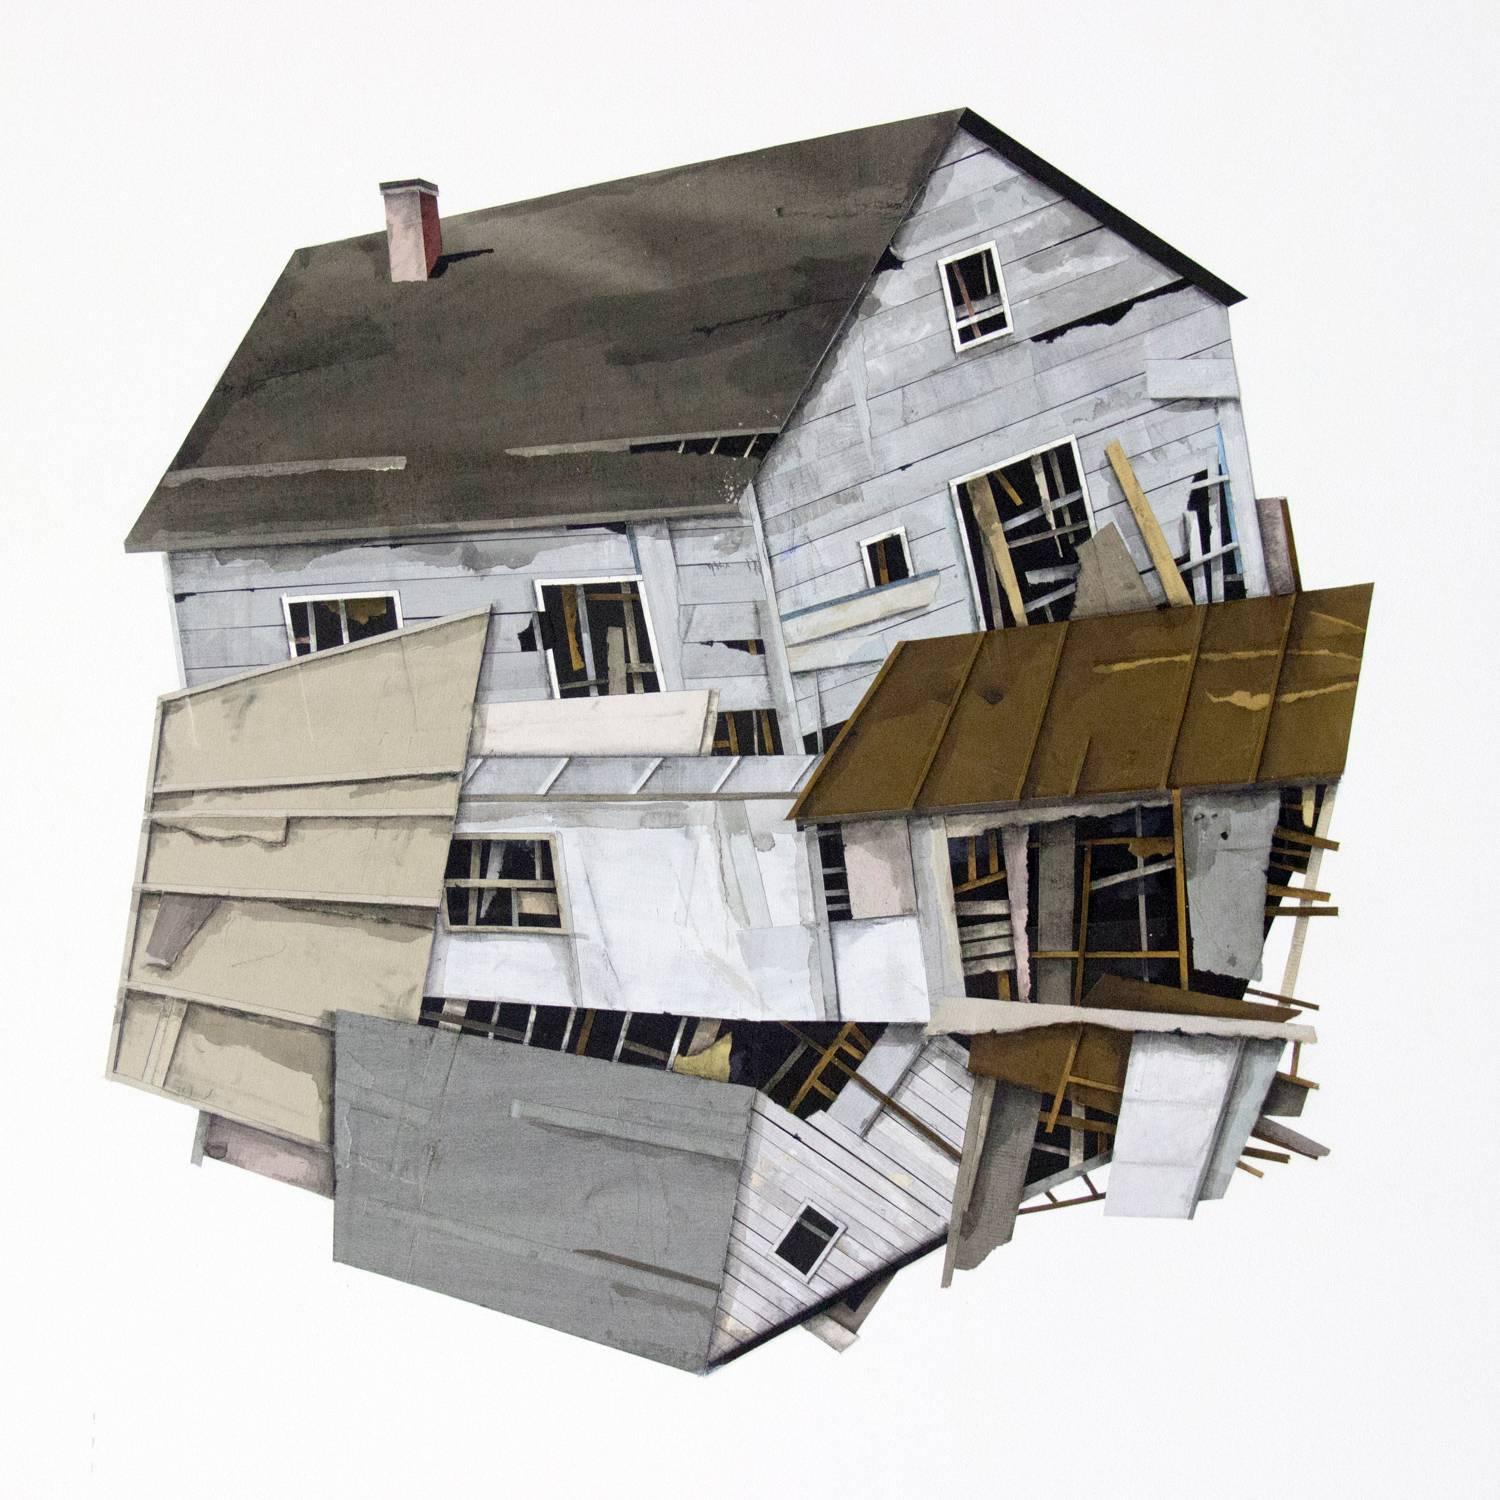 "Mass Study VIII", Abstracted Layered Paper and Drawing Collage, Architectural - Mixed Media Art by Seth Clark